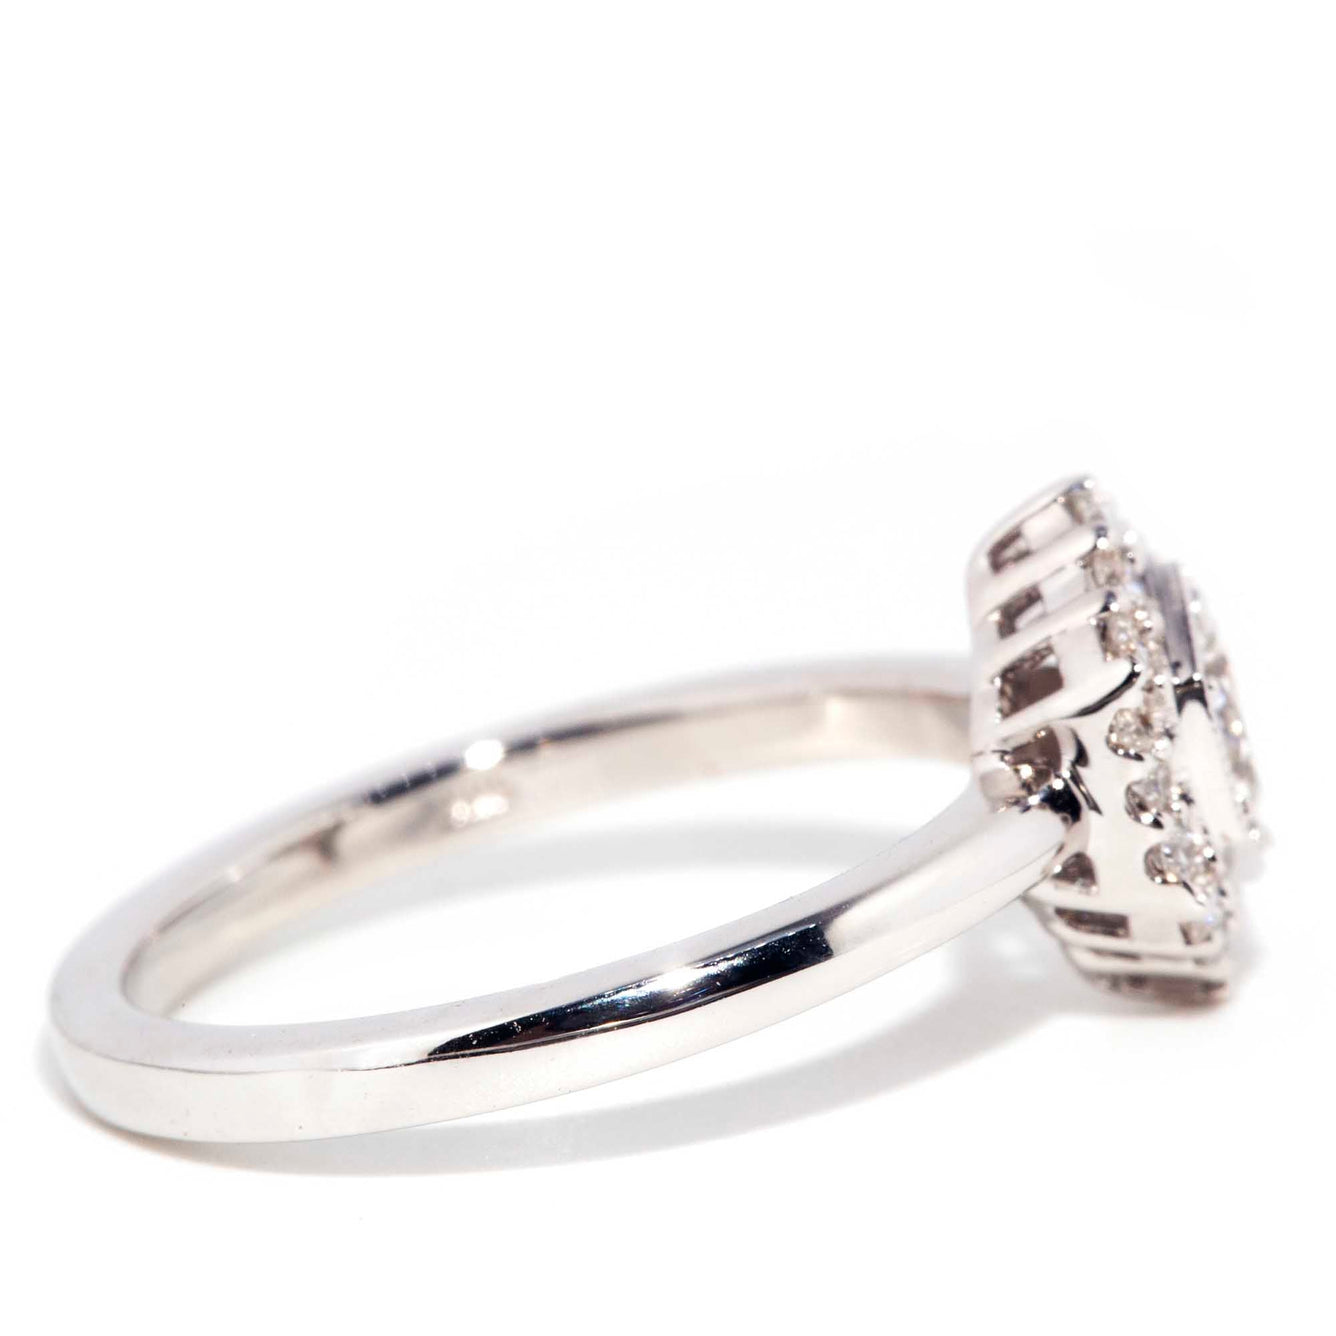 QUINN Contemporary 18ct White Gold Diamond Hexagonal Halo Ring* OB Gemmo $ Rings Imperial Jewellery 